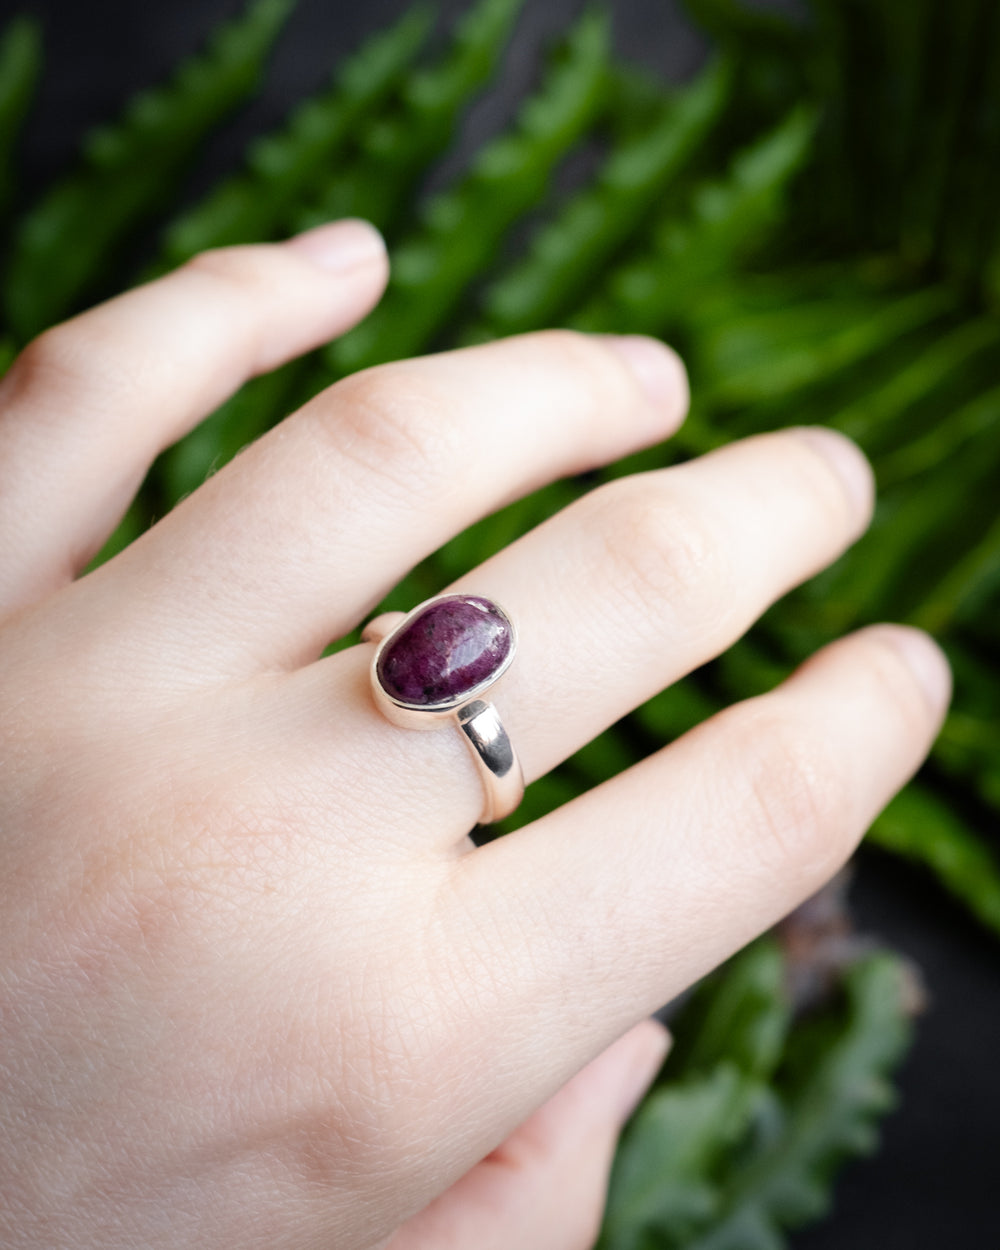 Ruby Ring in Sterling Silver - Size 6 1/4 US / M 1/2 UK - The Healing Pear